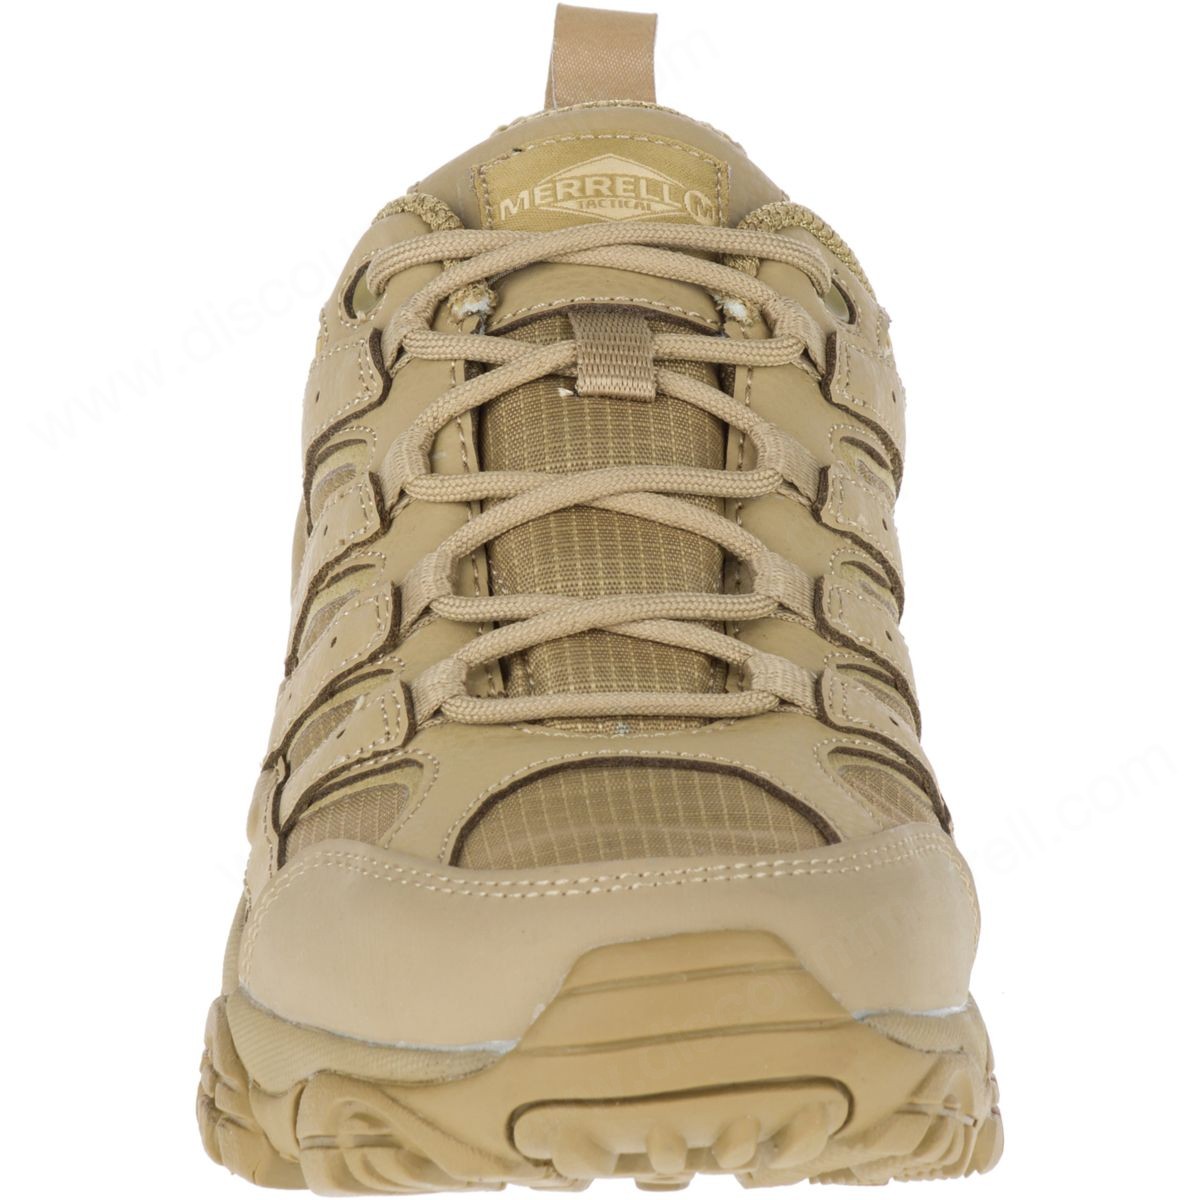 Merrell Woman's Moab Tactical Sneaker Coyote - -4